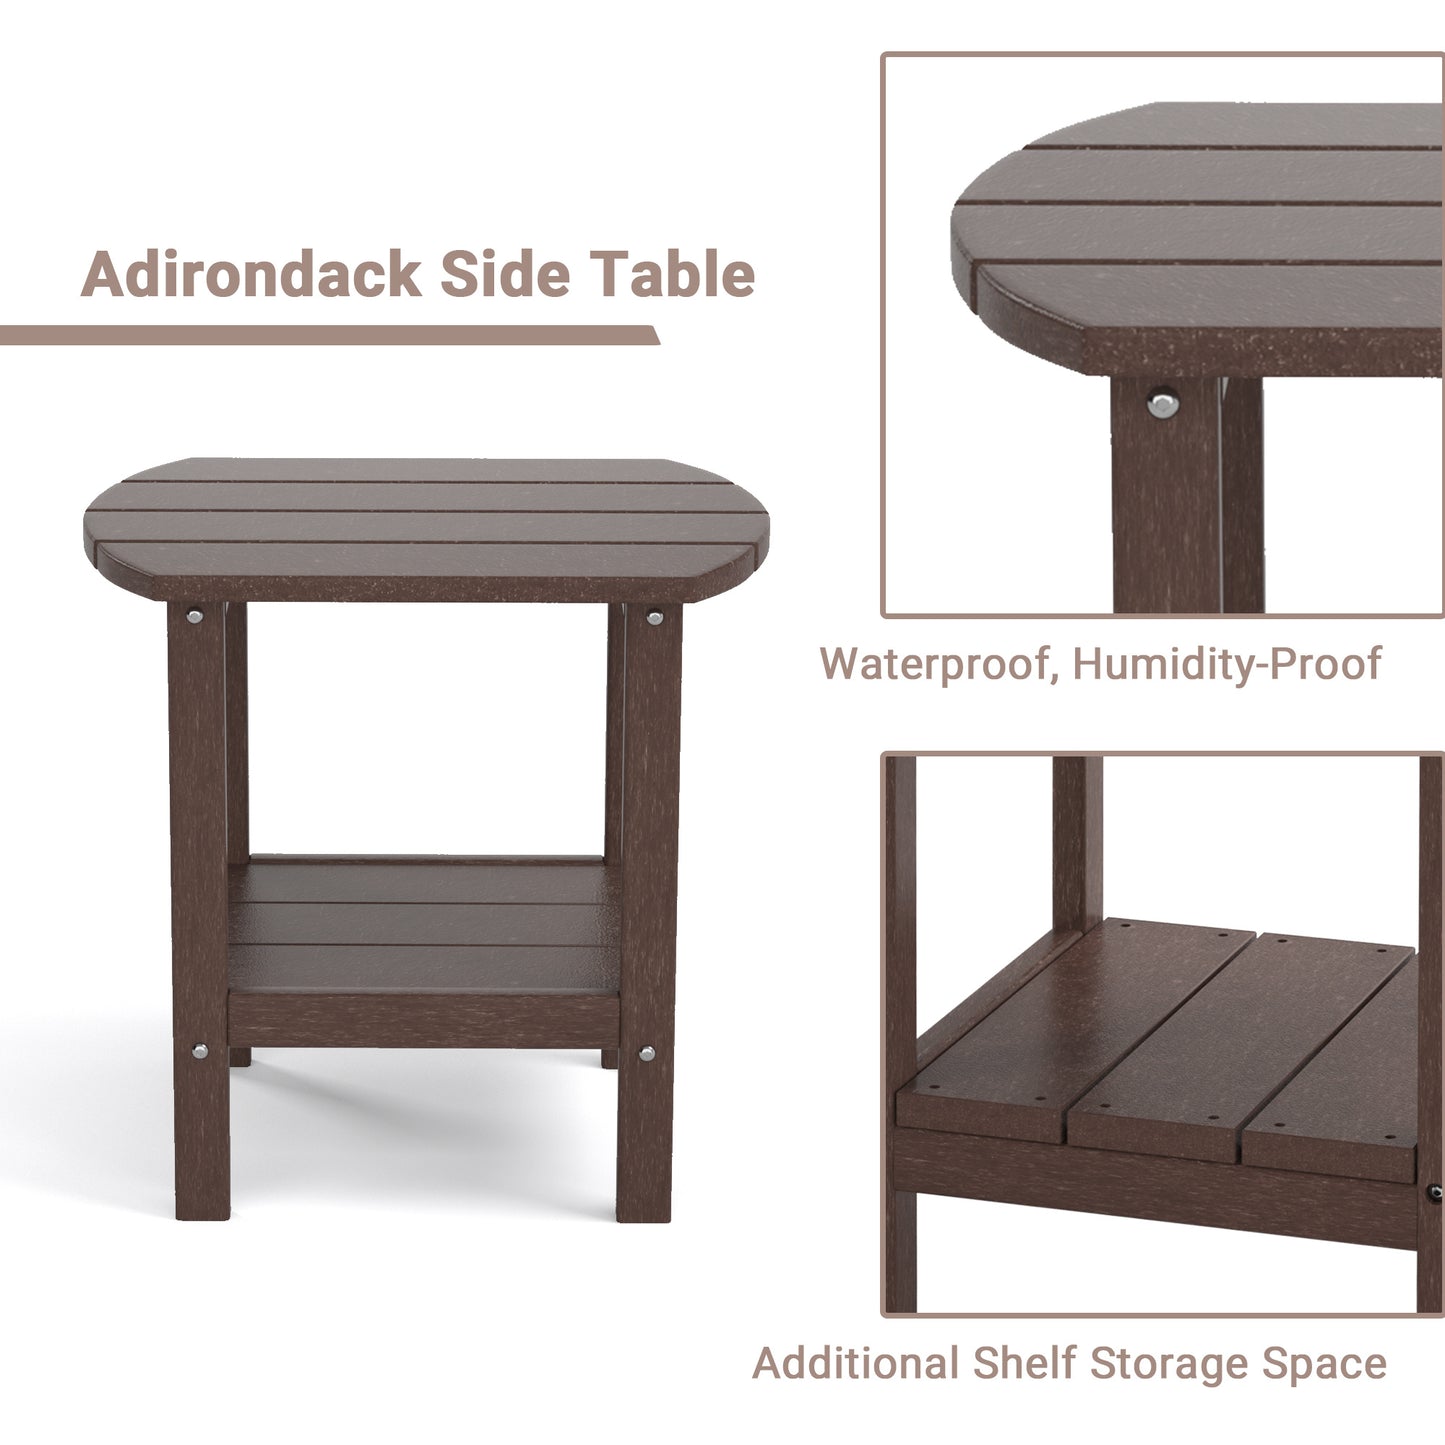 Outdoor Side Table for Adirondack Chairs;  All-Weather Resistant Humidity-Proof Waterproof Stain-Proof Accent Tables;  Backyard Deck Porch Beach Pool Yard Outside Lawn Patio Rocker Glider End Table